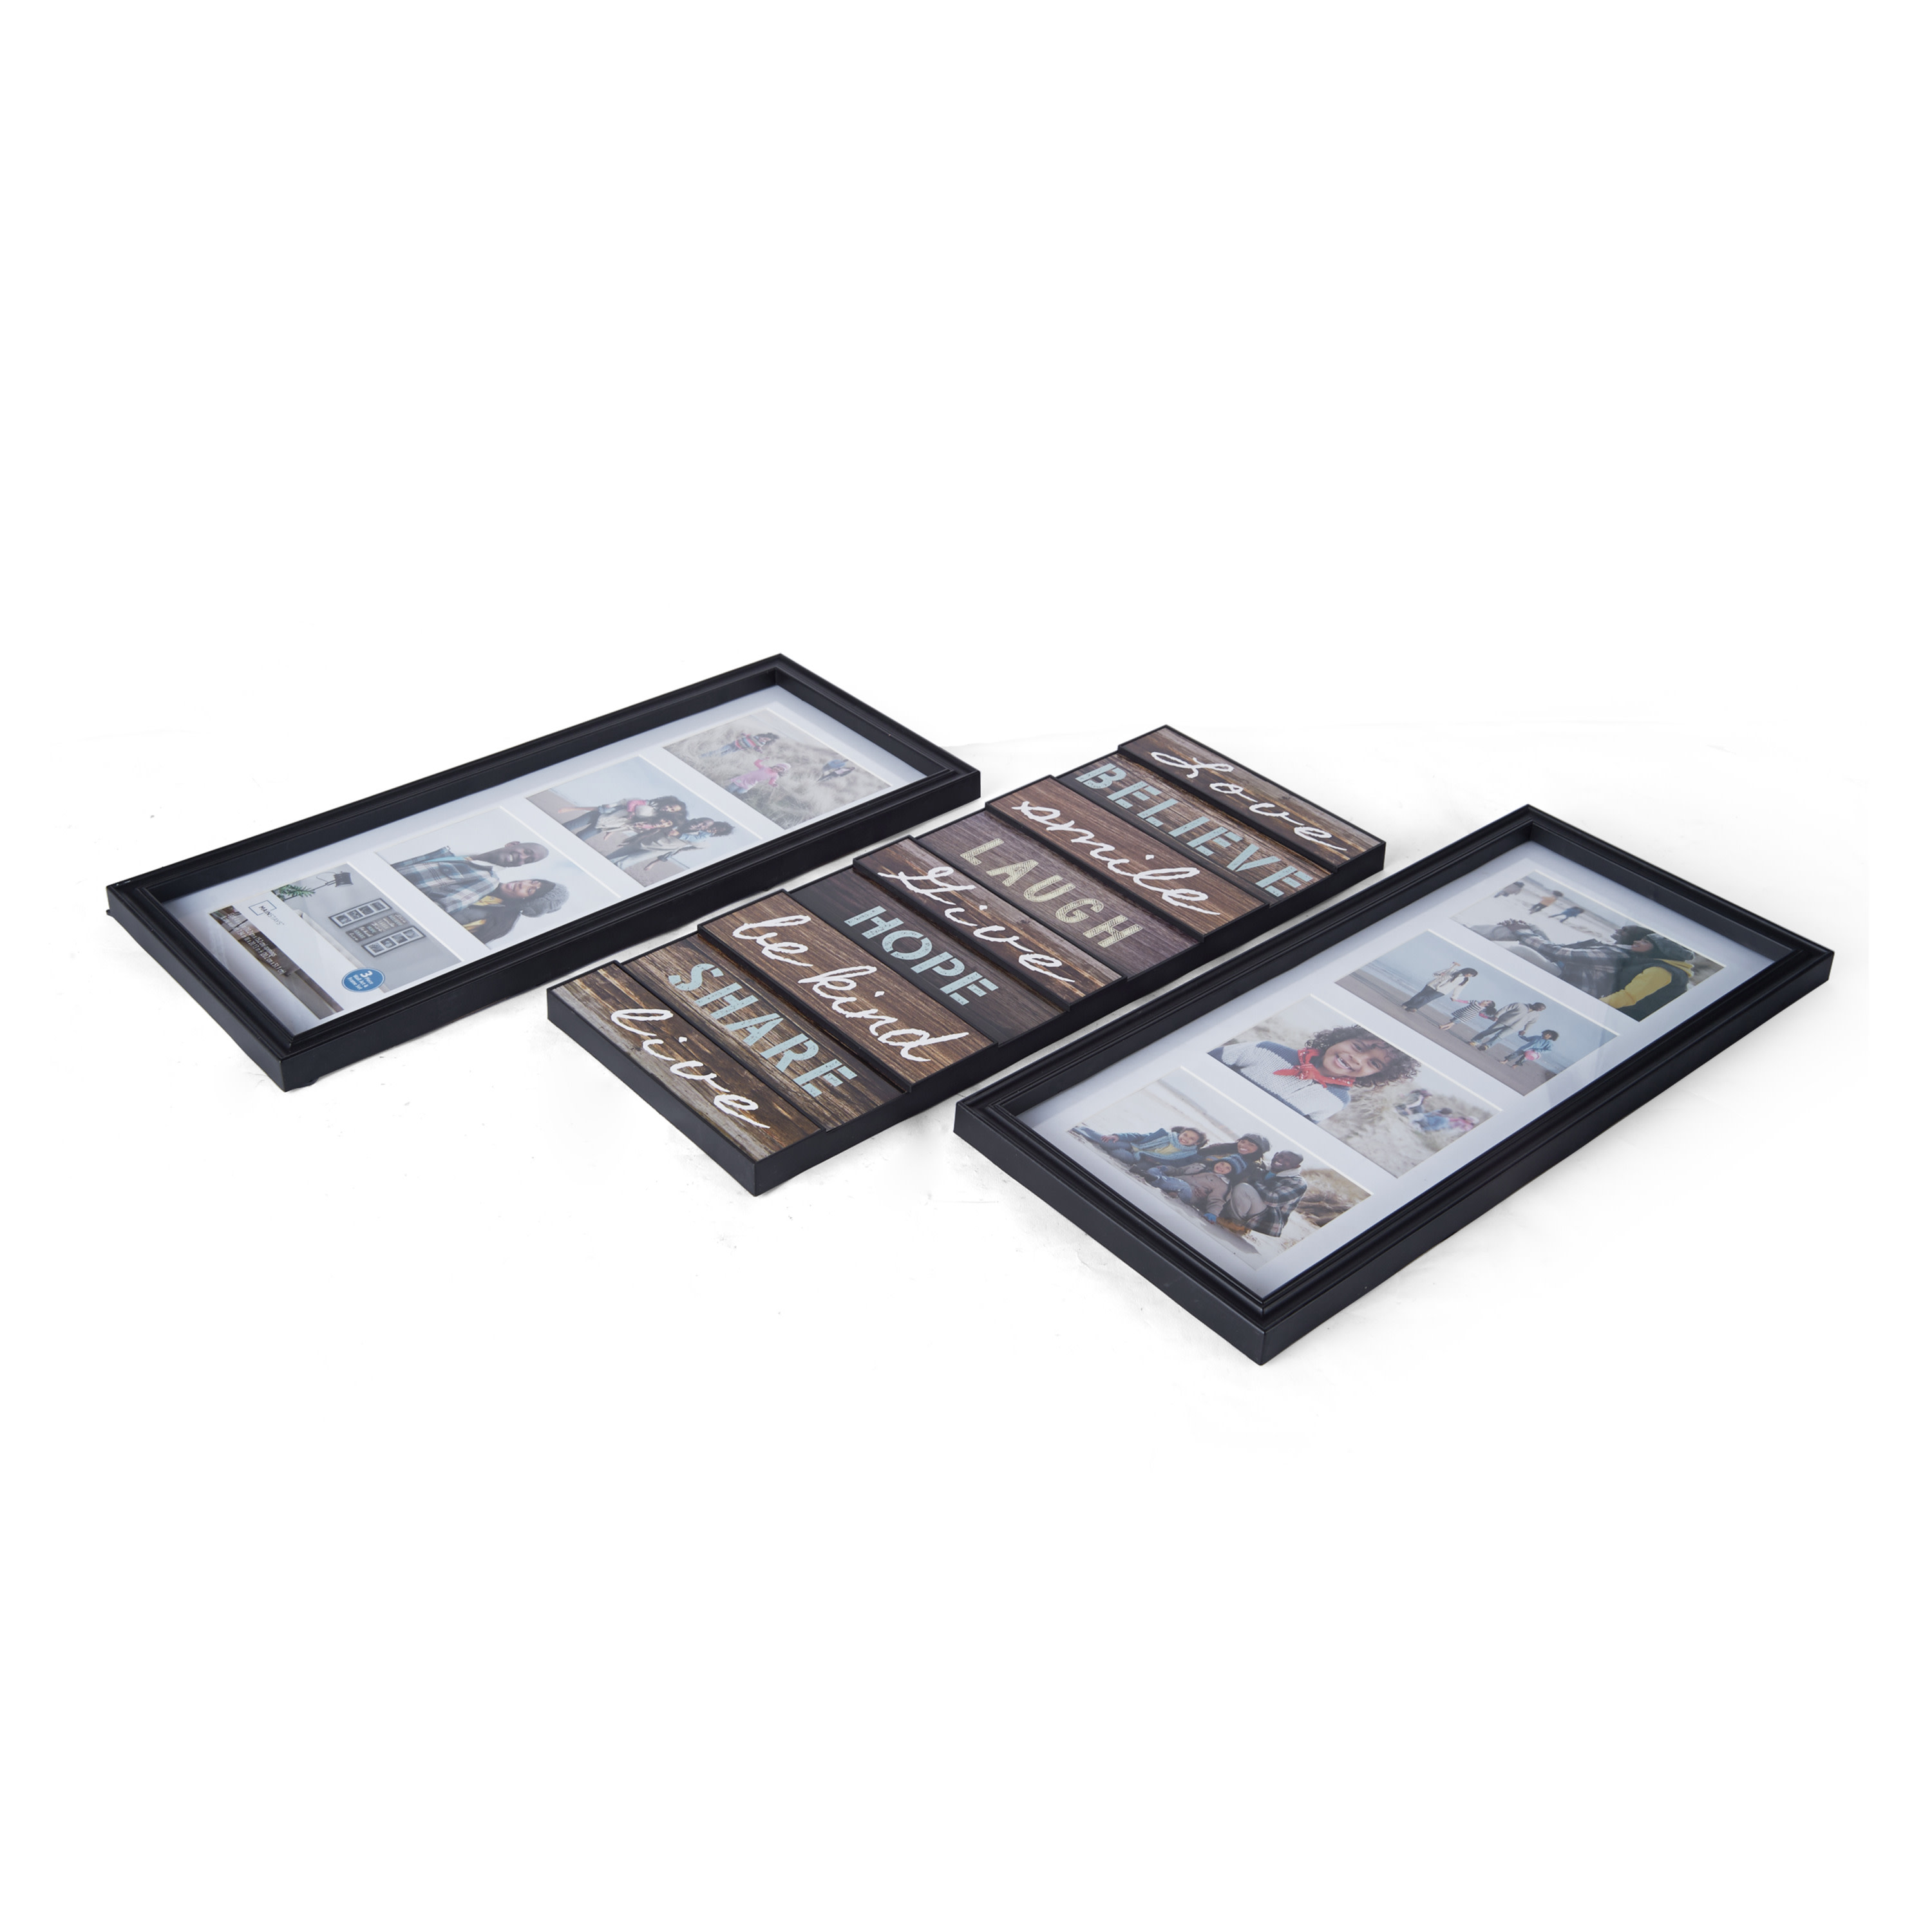 Mainstays Collage Picture Frames with Sentiment Plaque in Black (2 Frames and a Sentiment Wall Decor) - image 4 of 5